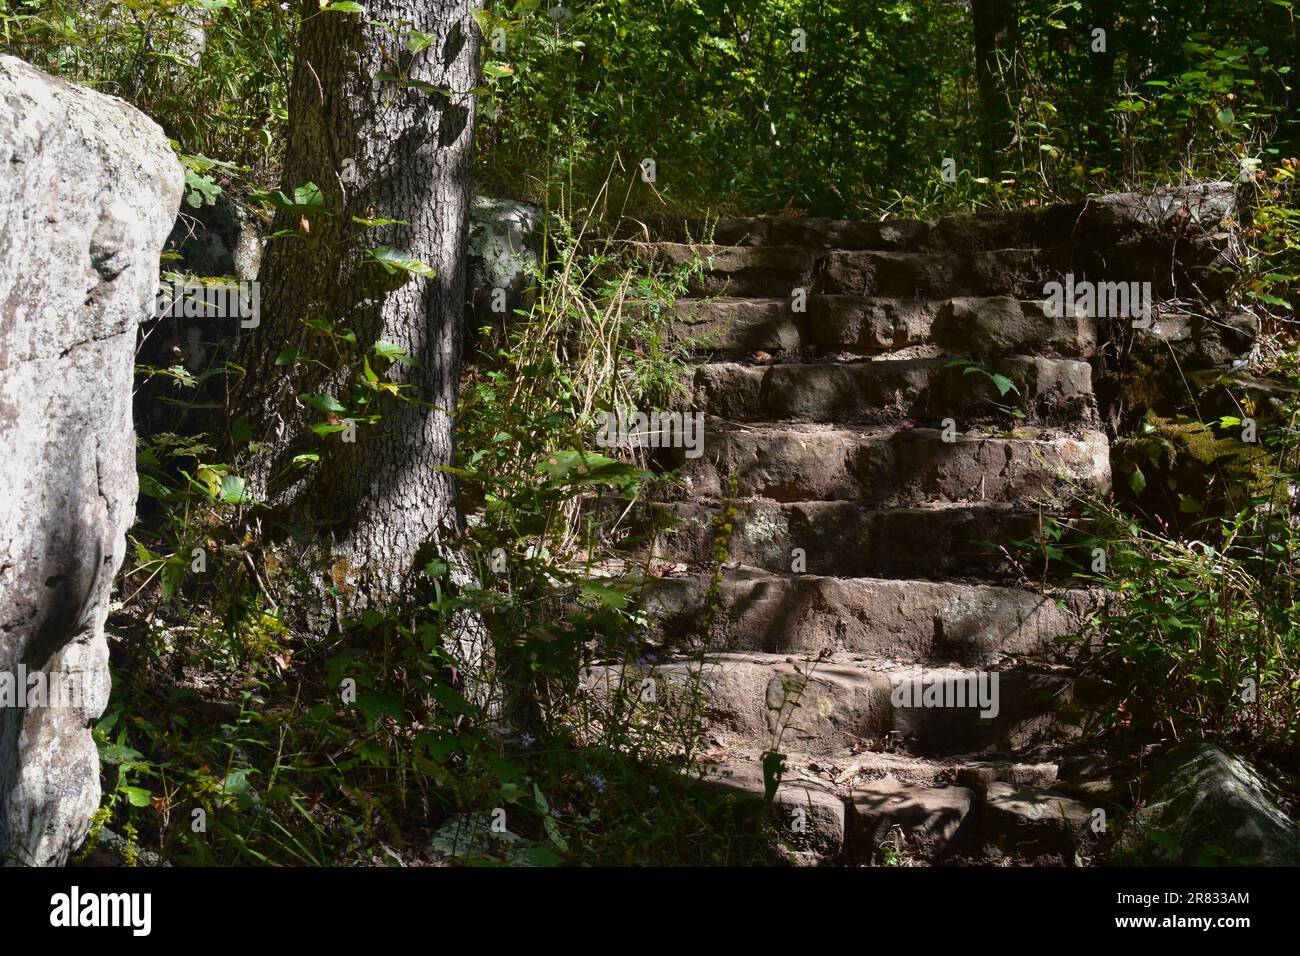 Stone and concrete steps located in the Pedestal Rocks Scenic Area, Pelsor, Sand Gap, Witts Spring, Arkansas, Ozark-St Francis National Forest Stock Photo